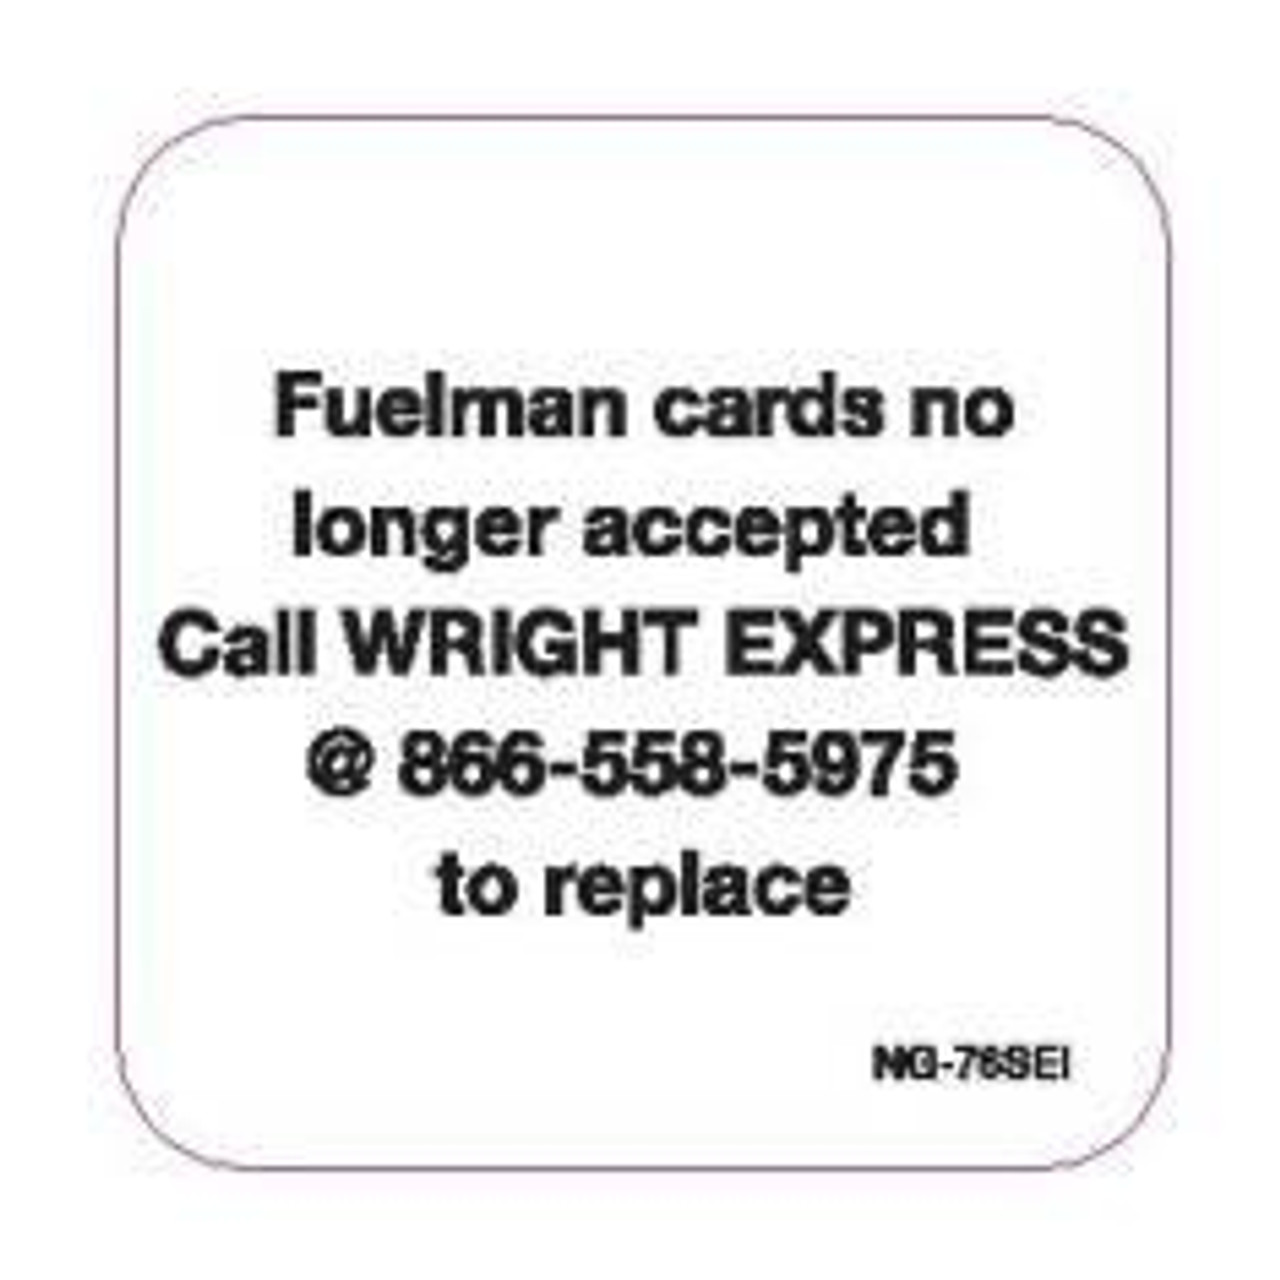 PID-1150 - Fuelman Cards No Longer Accepted 2" x 2"